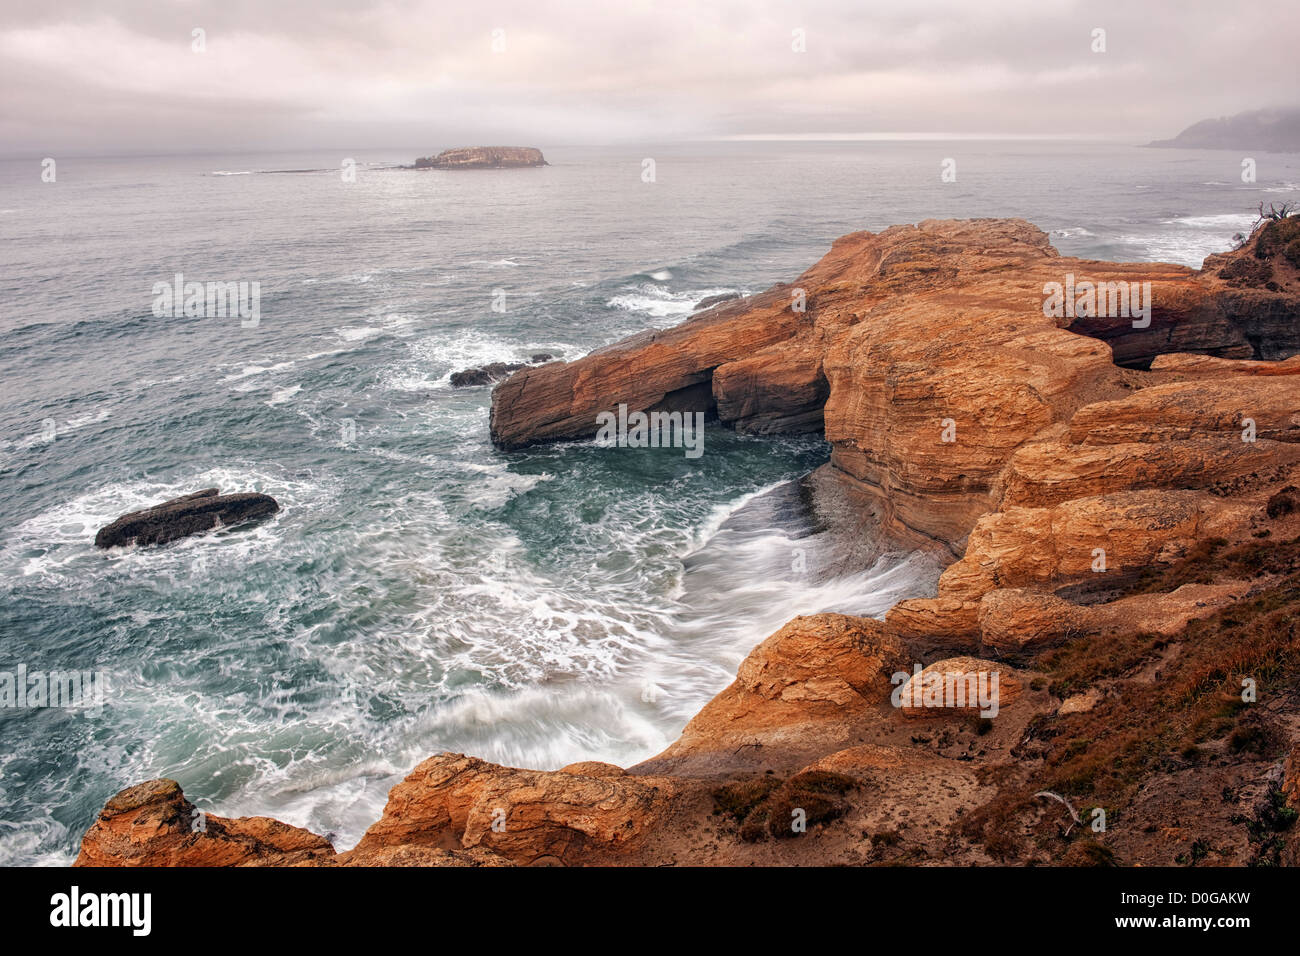 Morning fog lifts revealing the sandstone cliffs of Oregon’s Devil’s Punchbowl State Park and offshore Gull Island. Stock Photo